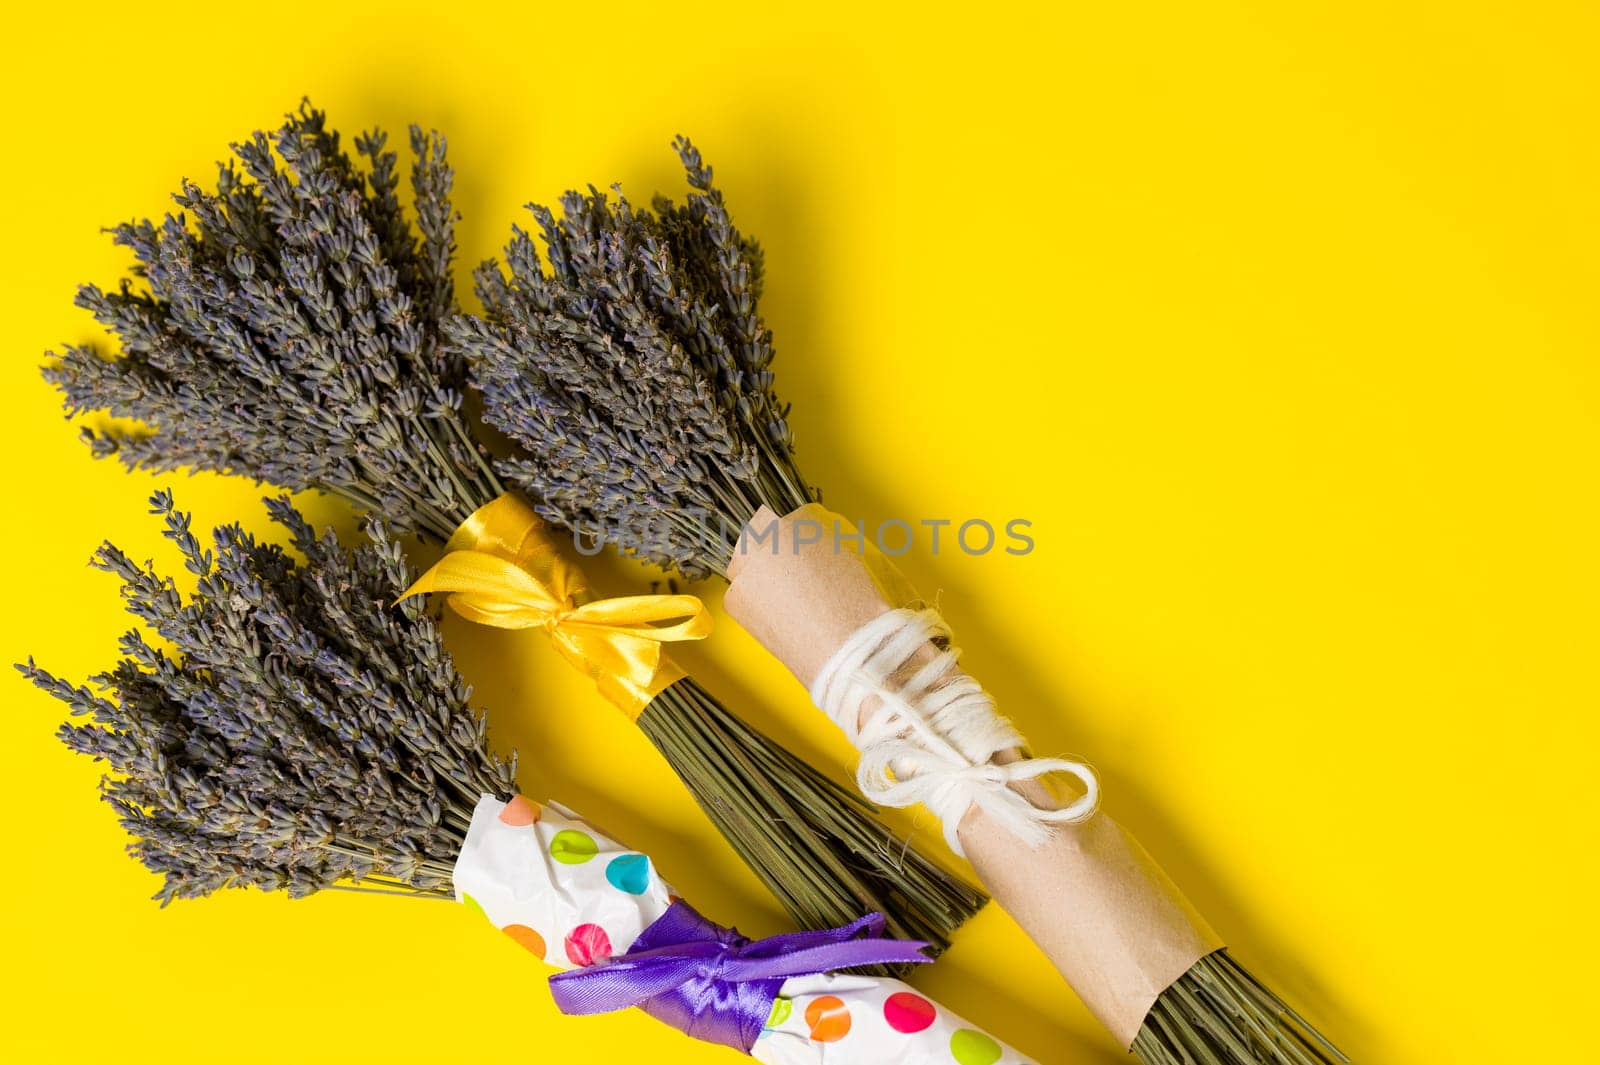 Three bouquets of dried lavender on a yellow background, lavender is a cosmetic plant.